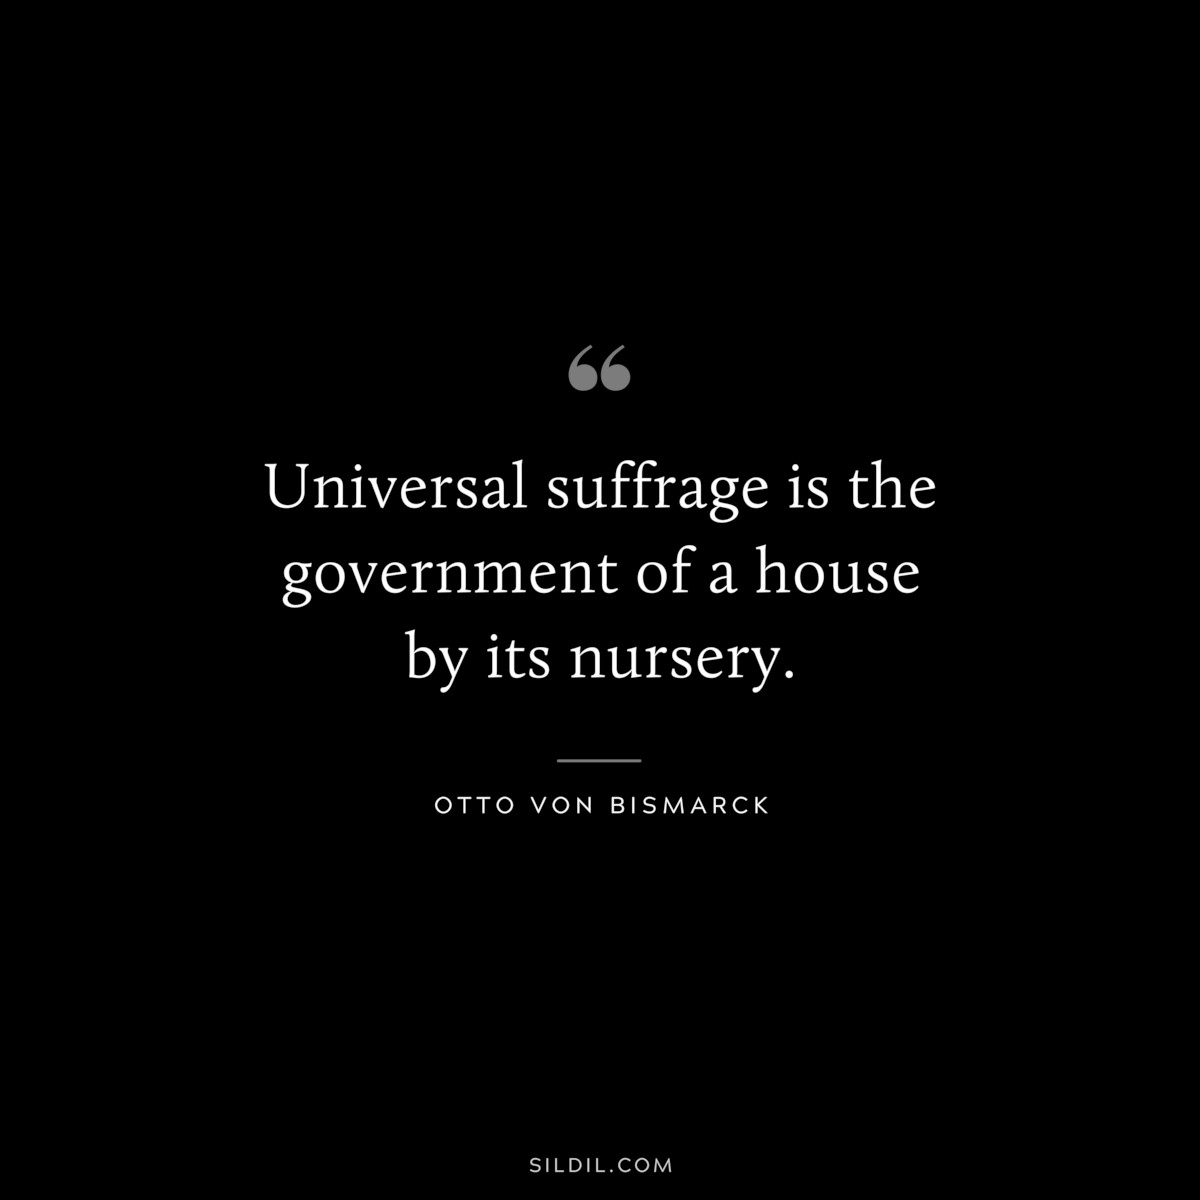 Universal suffrage is the government of a house by its nursery. ― Otto von Bismarck